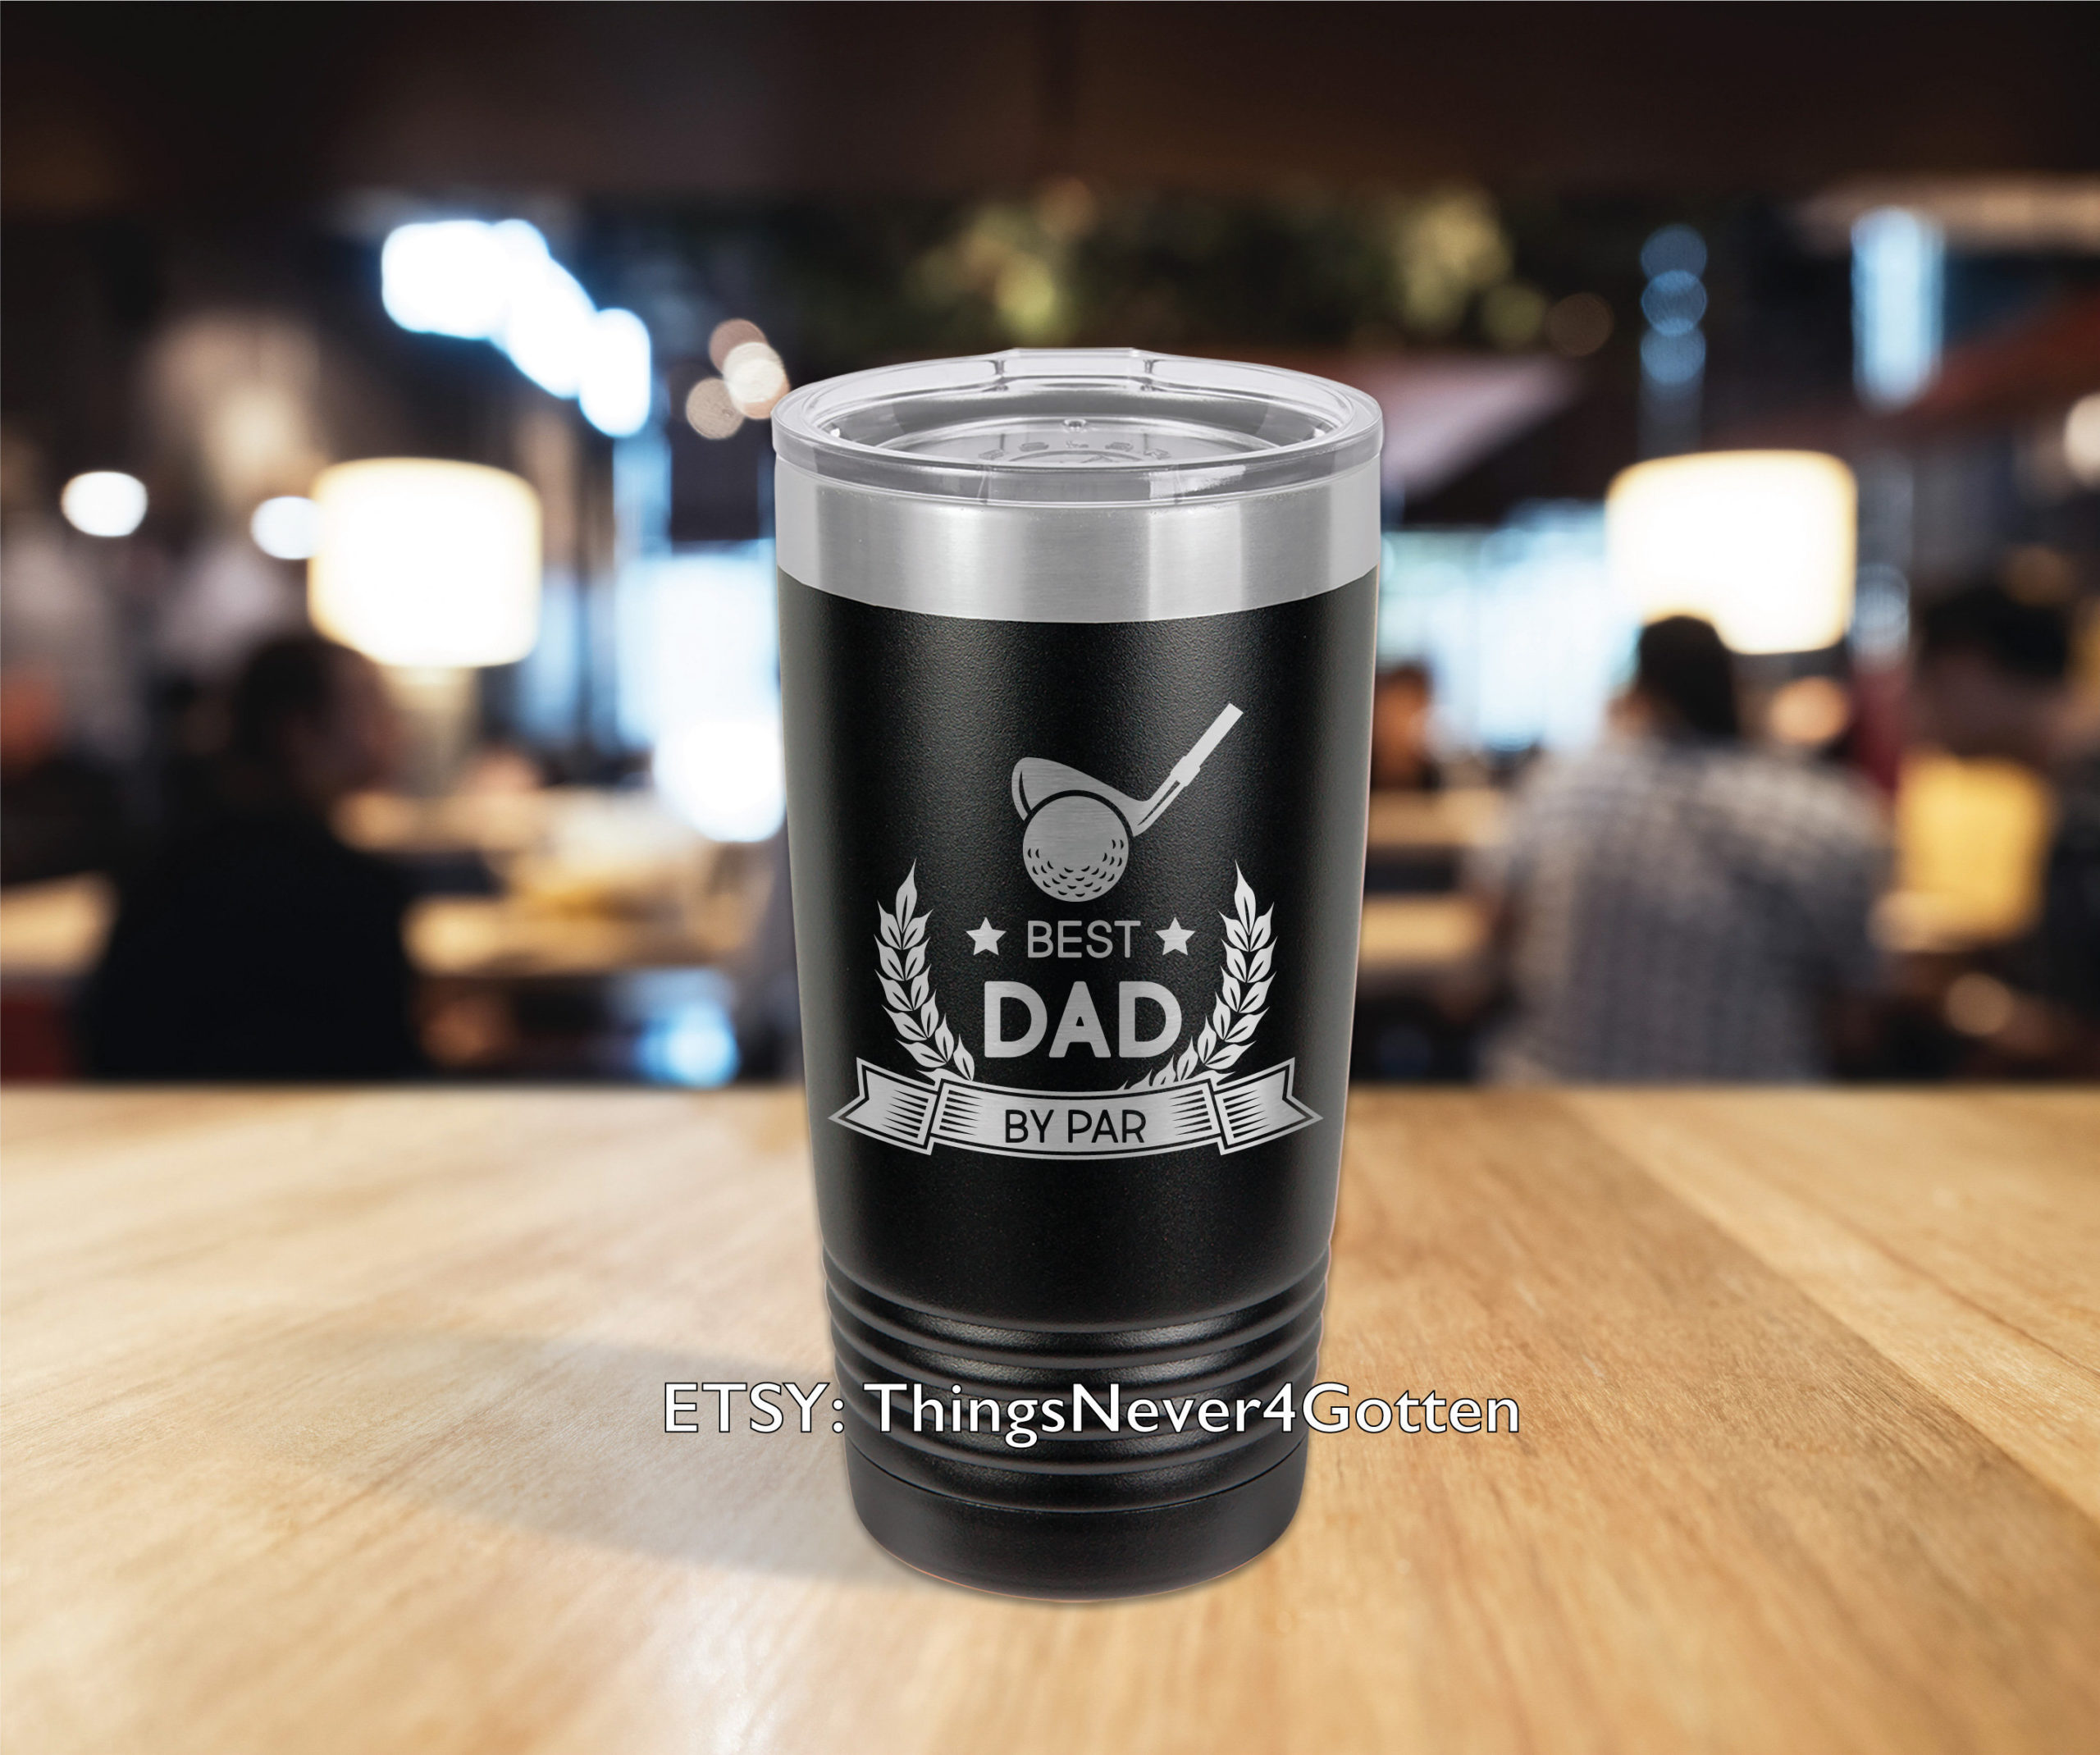 https://thingsneverforgotten.com/wp-content/uploads/2020/07/golf-fathers-day-gift-laser-engraved-20oz-tumbler-funny-2-5f0d4b45-scaled.jpg